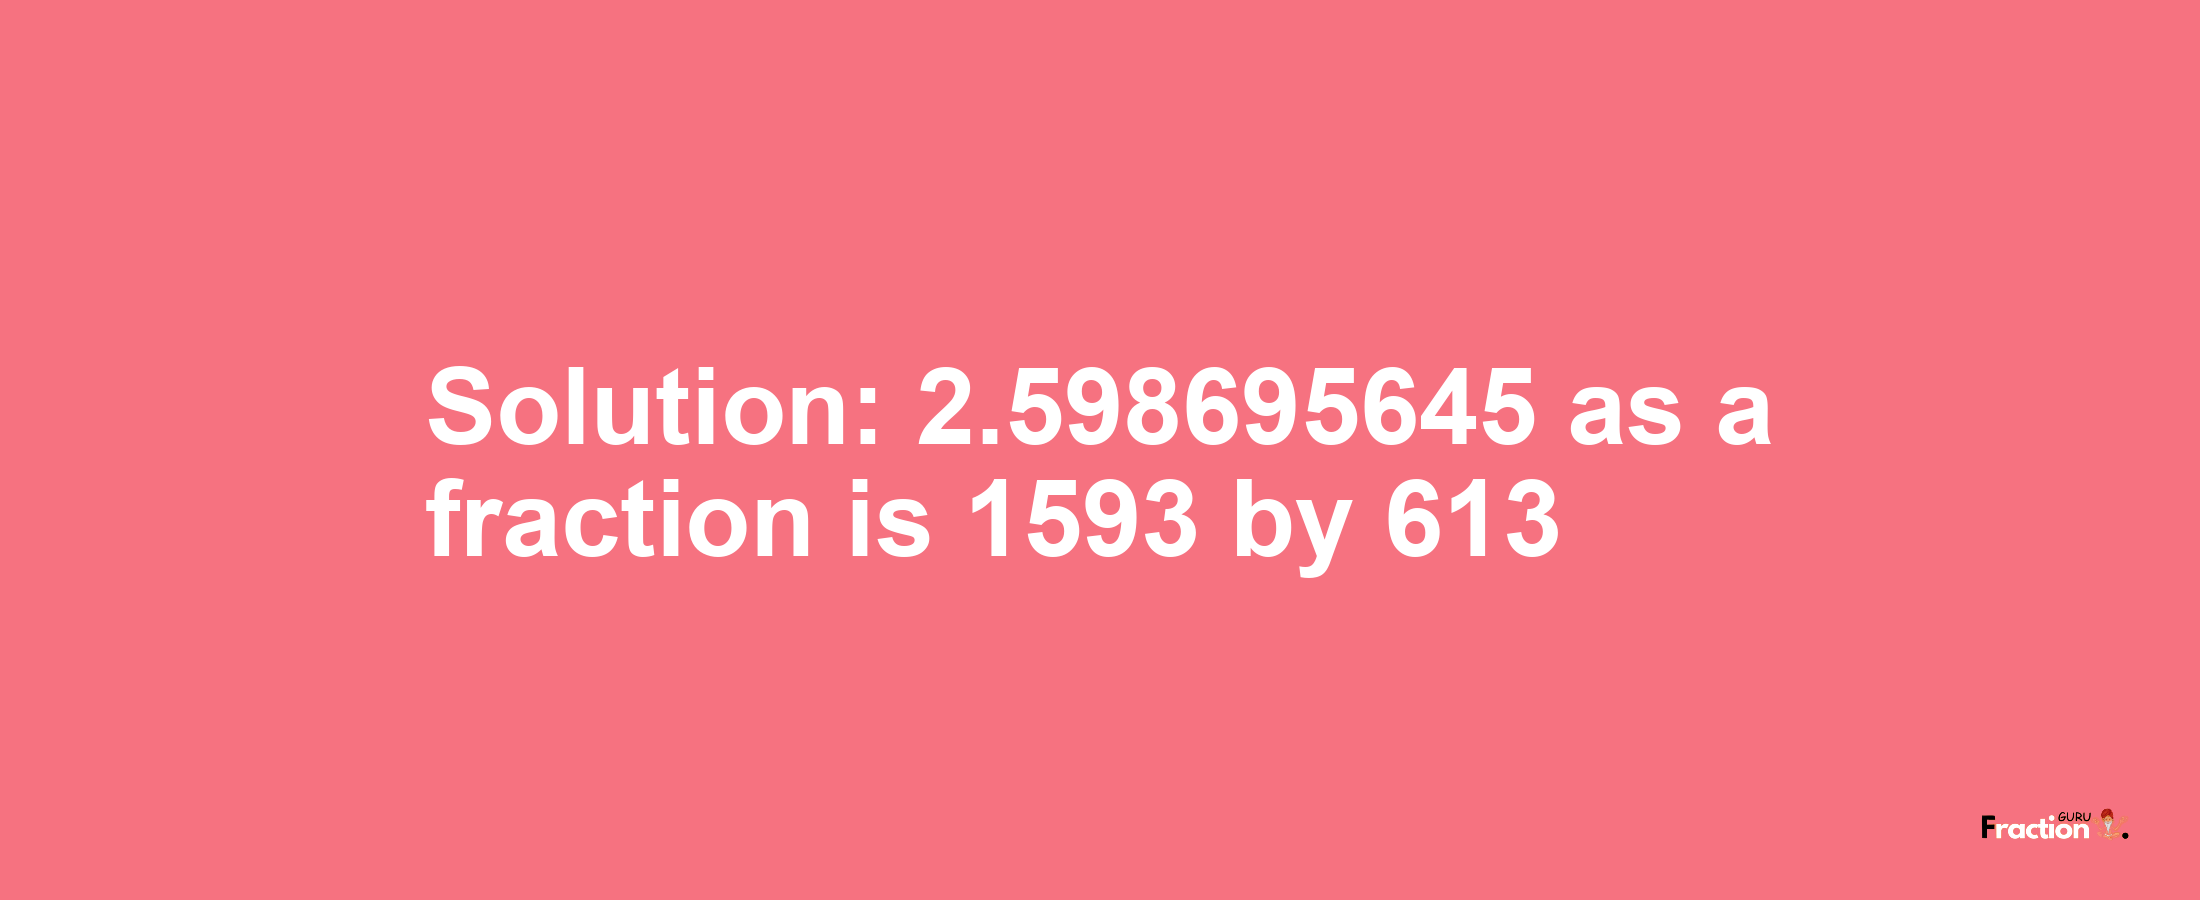 Solution:2.598695645 as a fraction is 1593/613